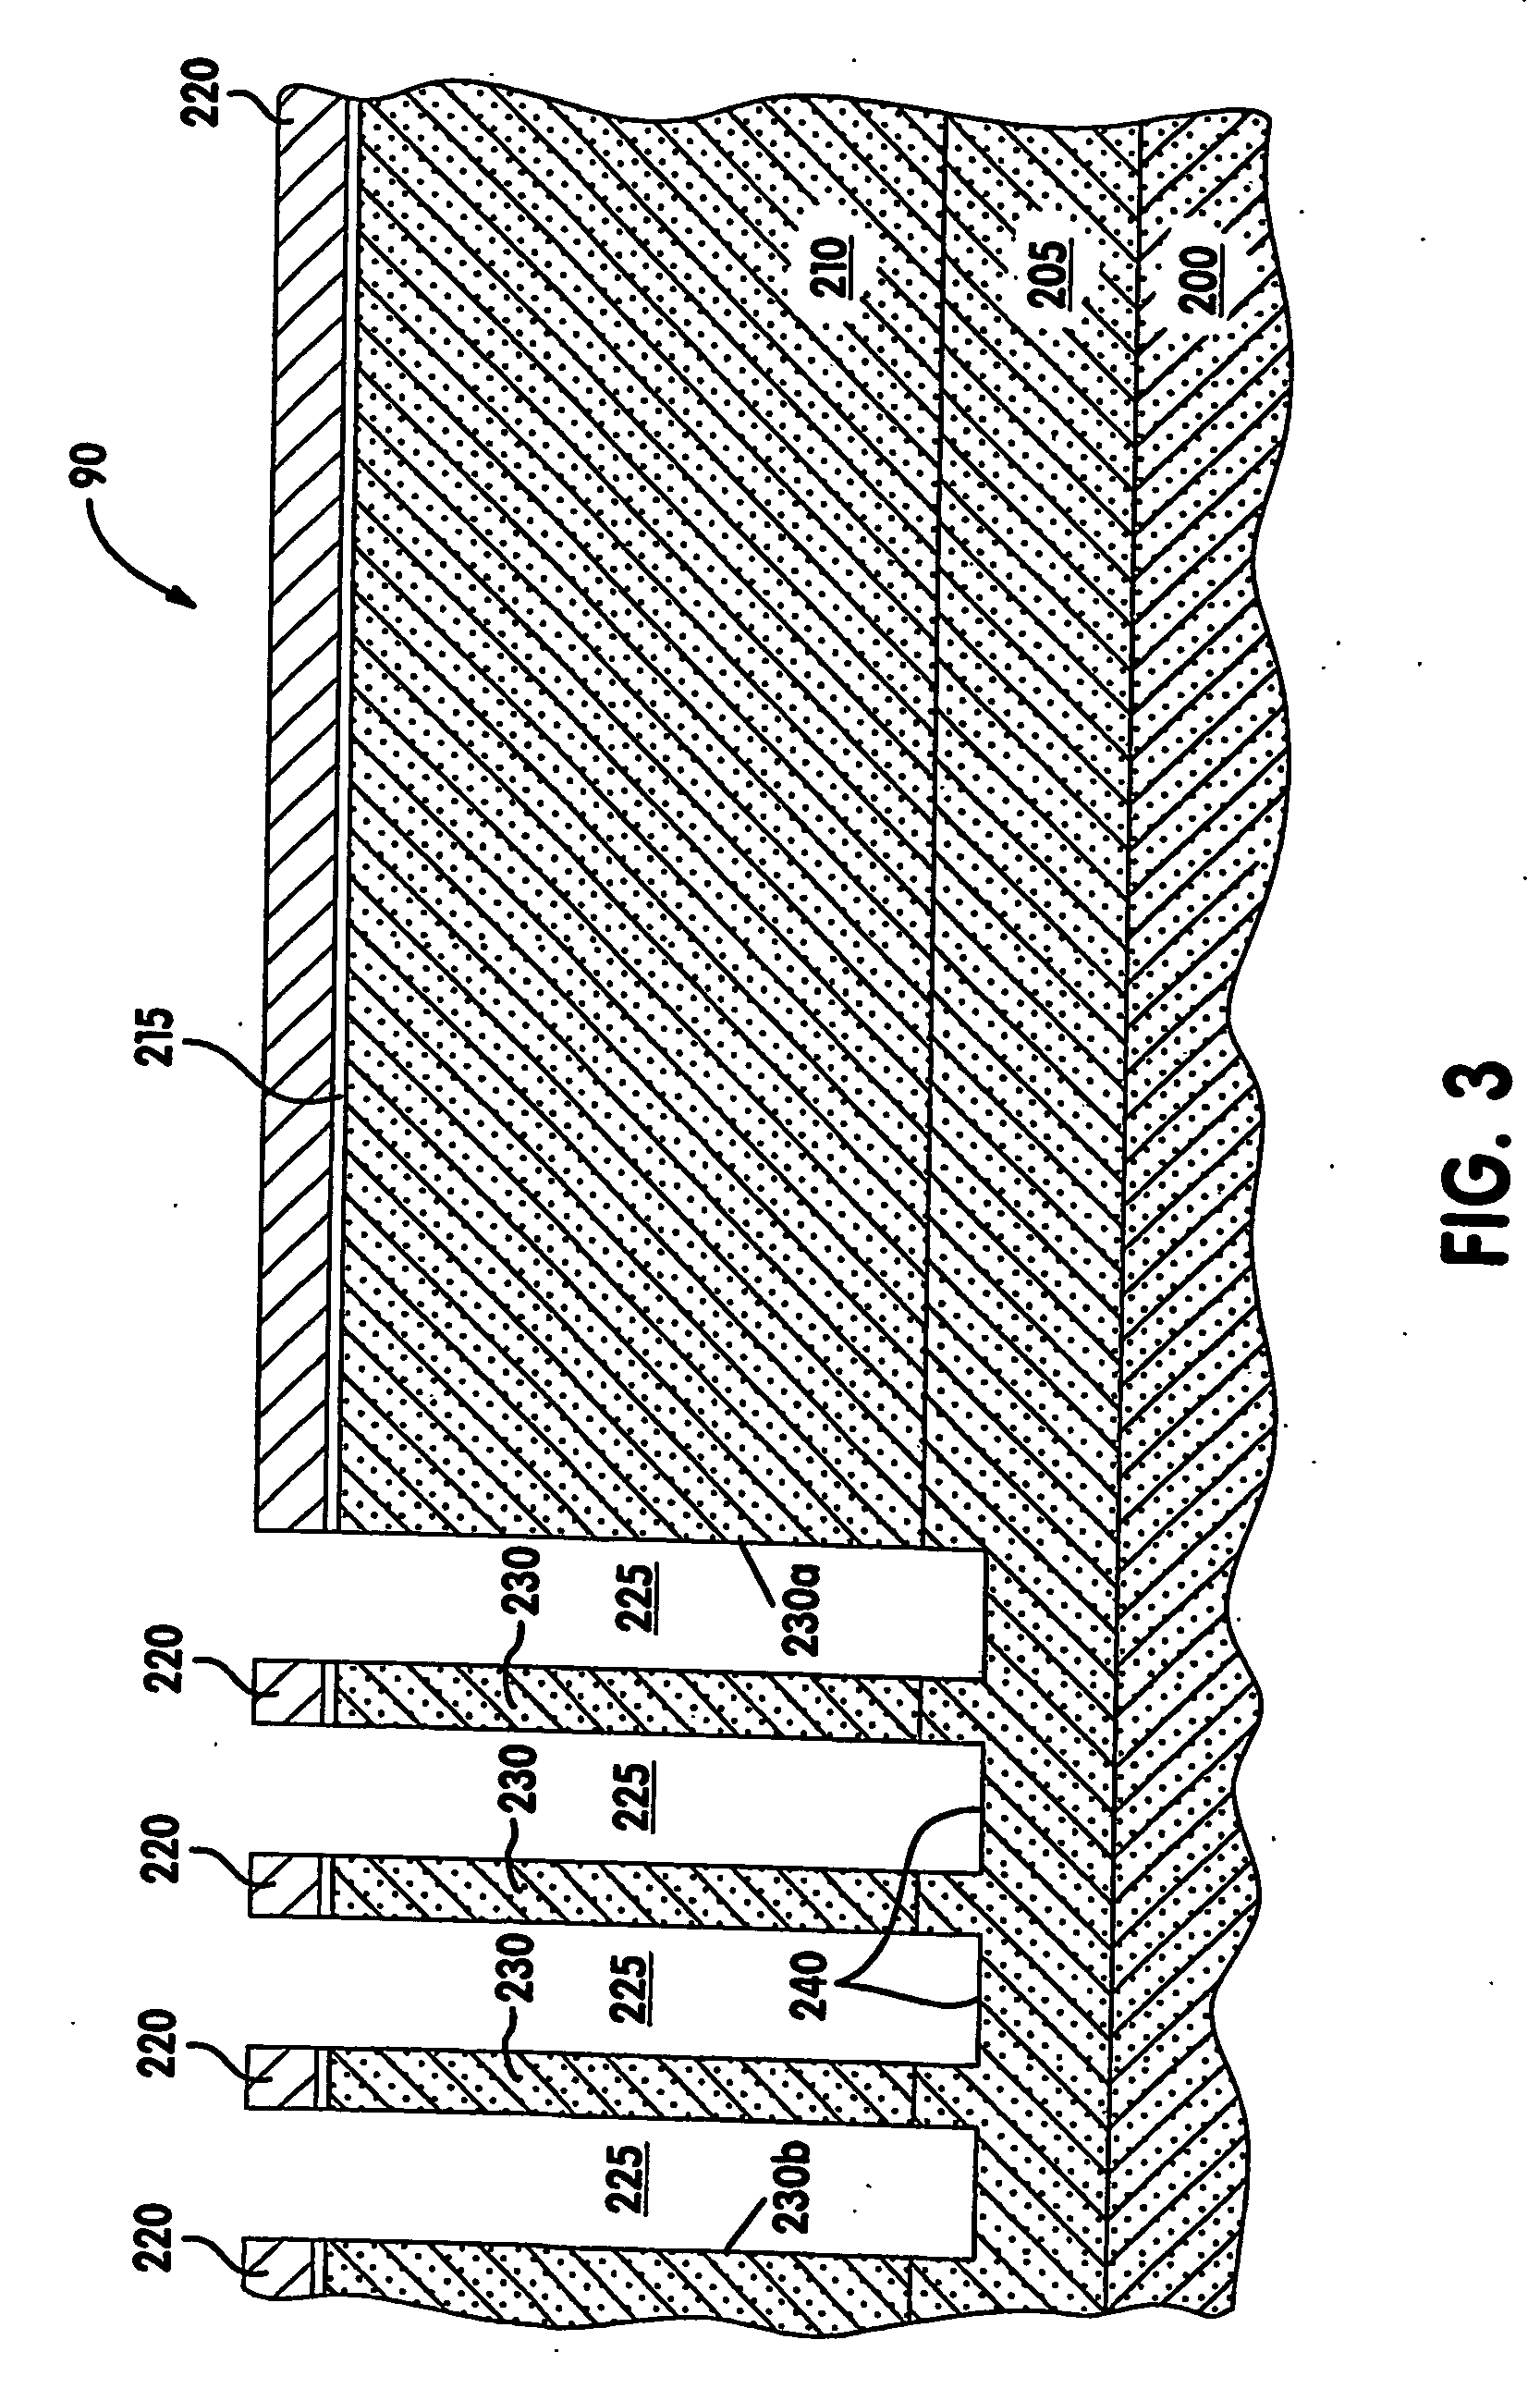 Power semiconductor device and method therefor